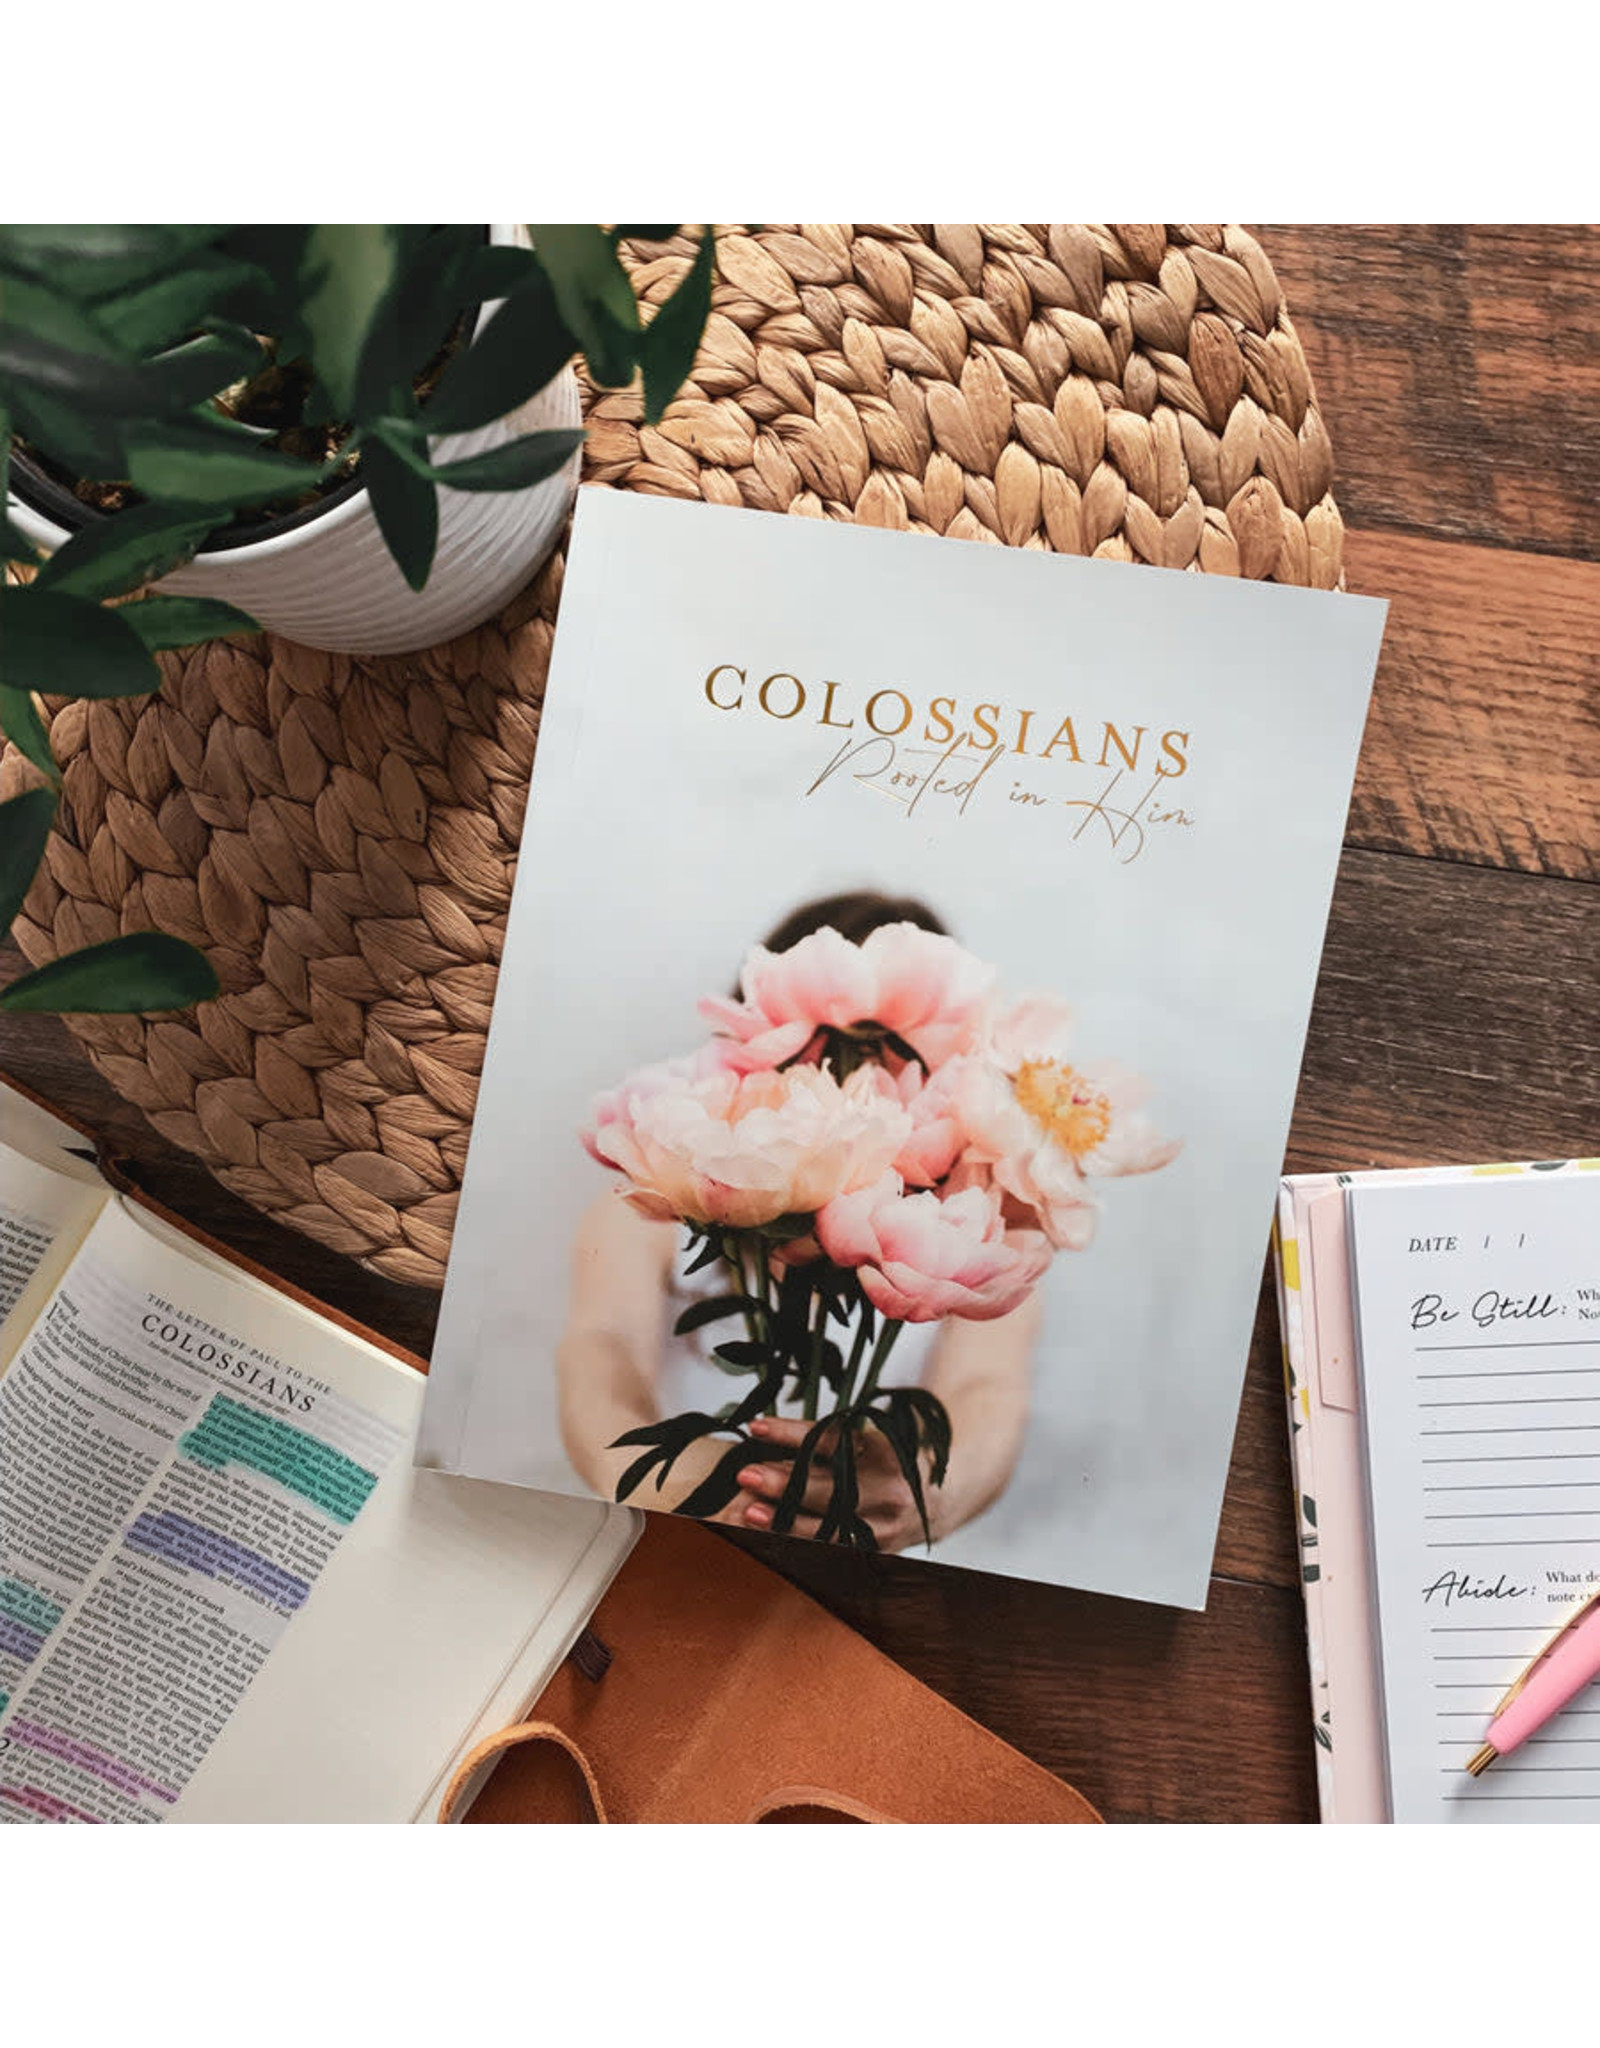 Colossians "Rooted in Him" Study